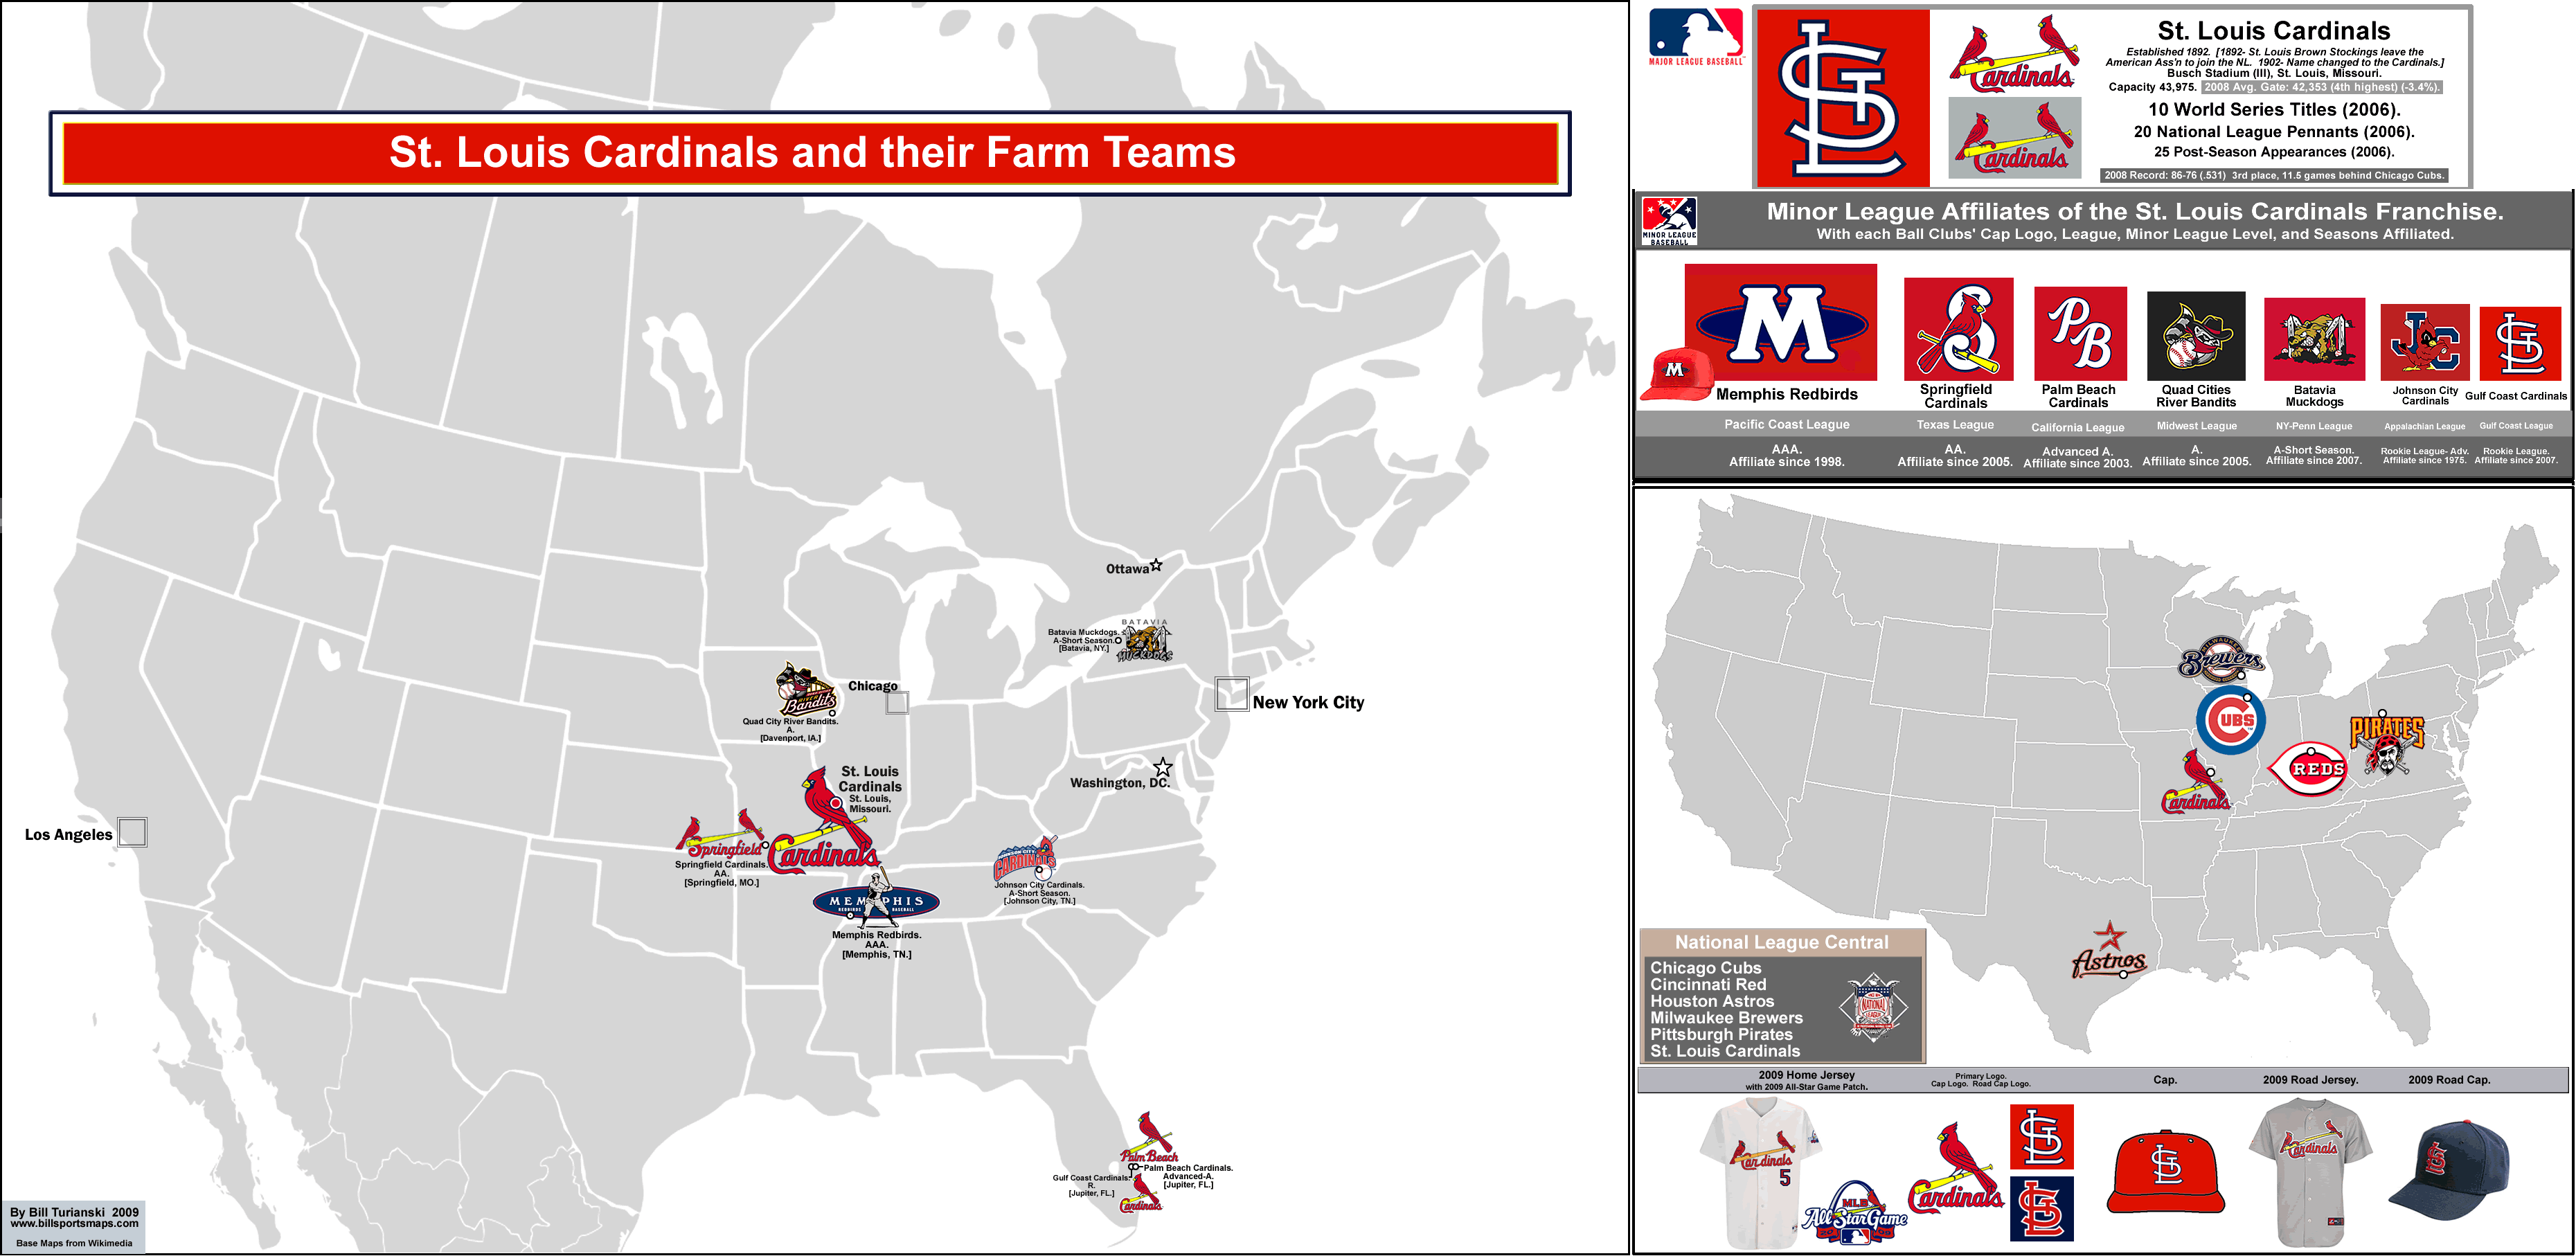 MLB Ball Clubs and their Minor League Affiliates: the St. Louis Cardinals. « www.ermes-unice.fr